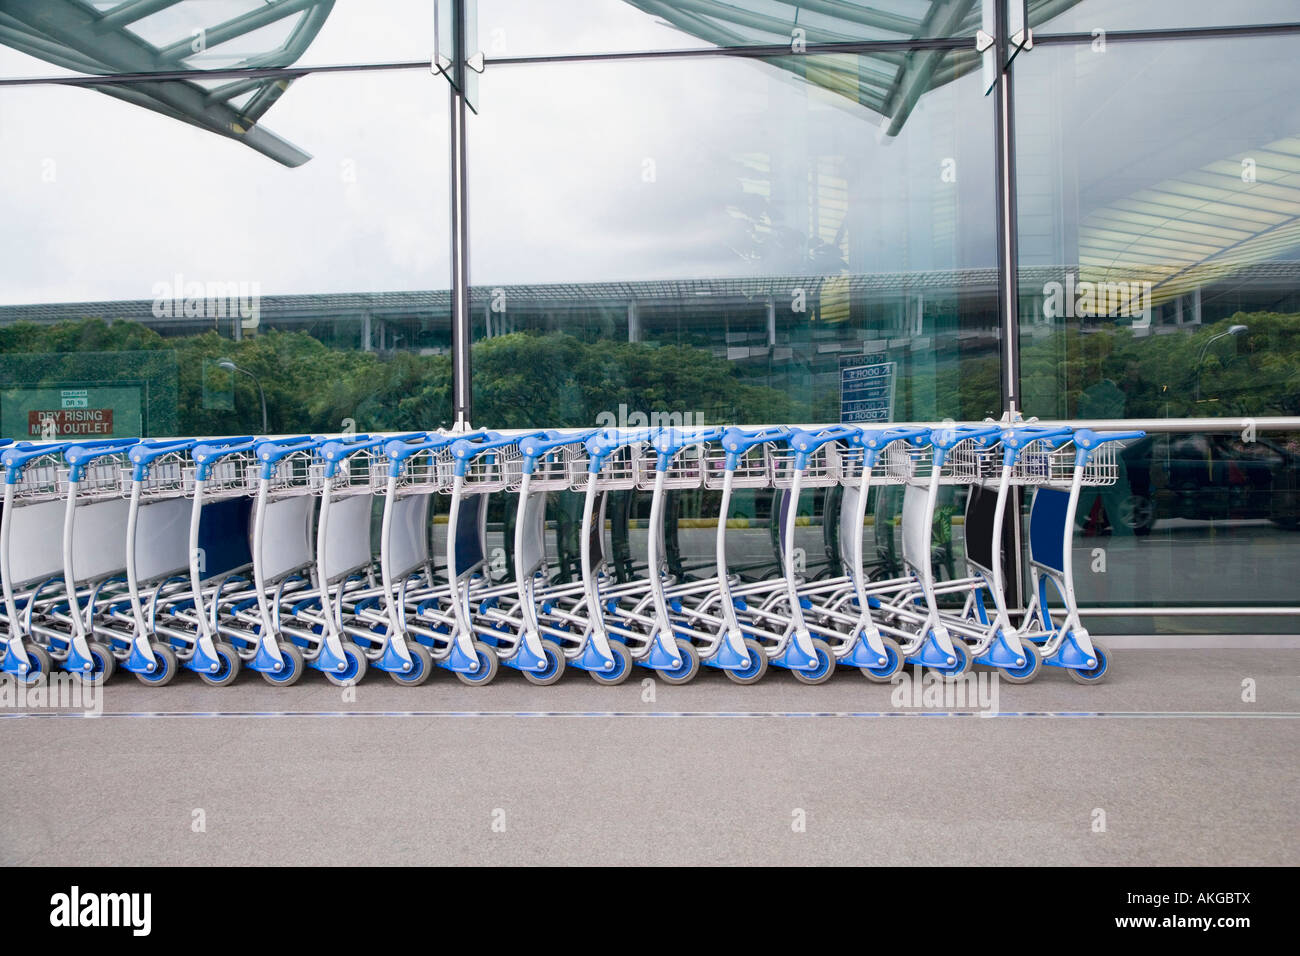 Luggage carts in a row outside an airport Stock Photo